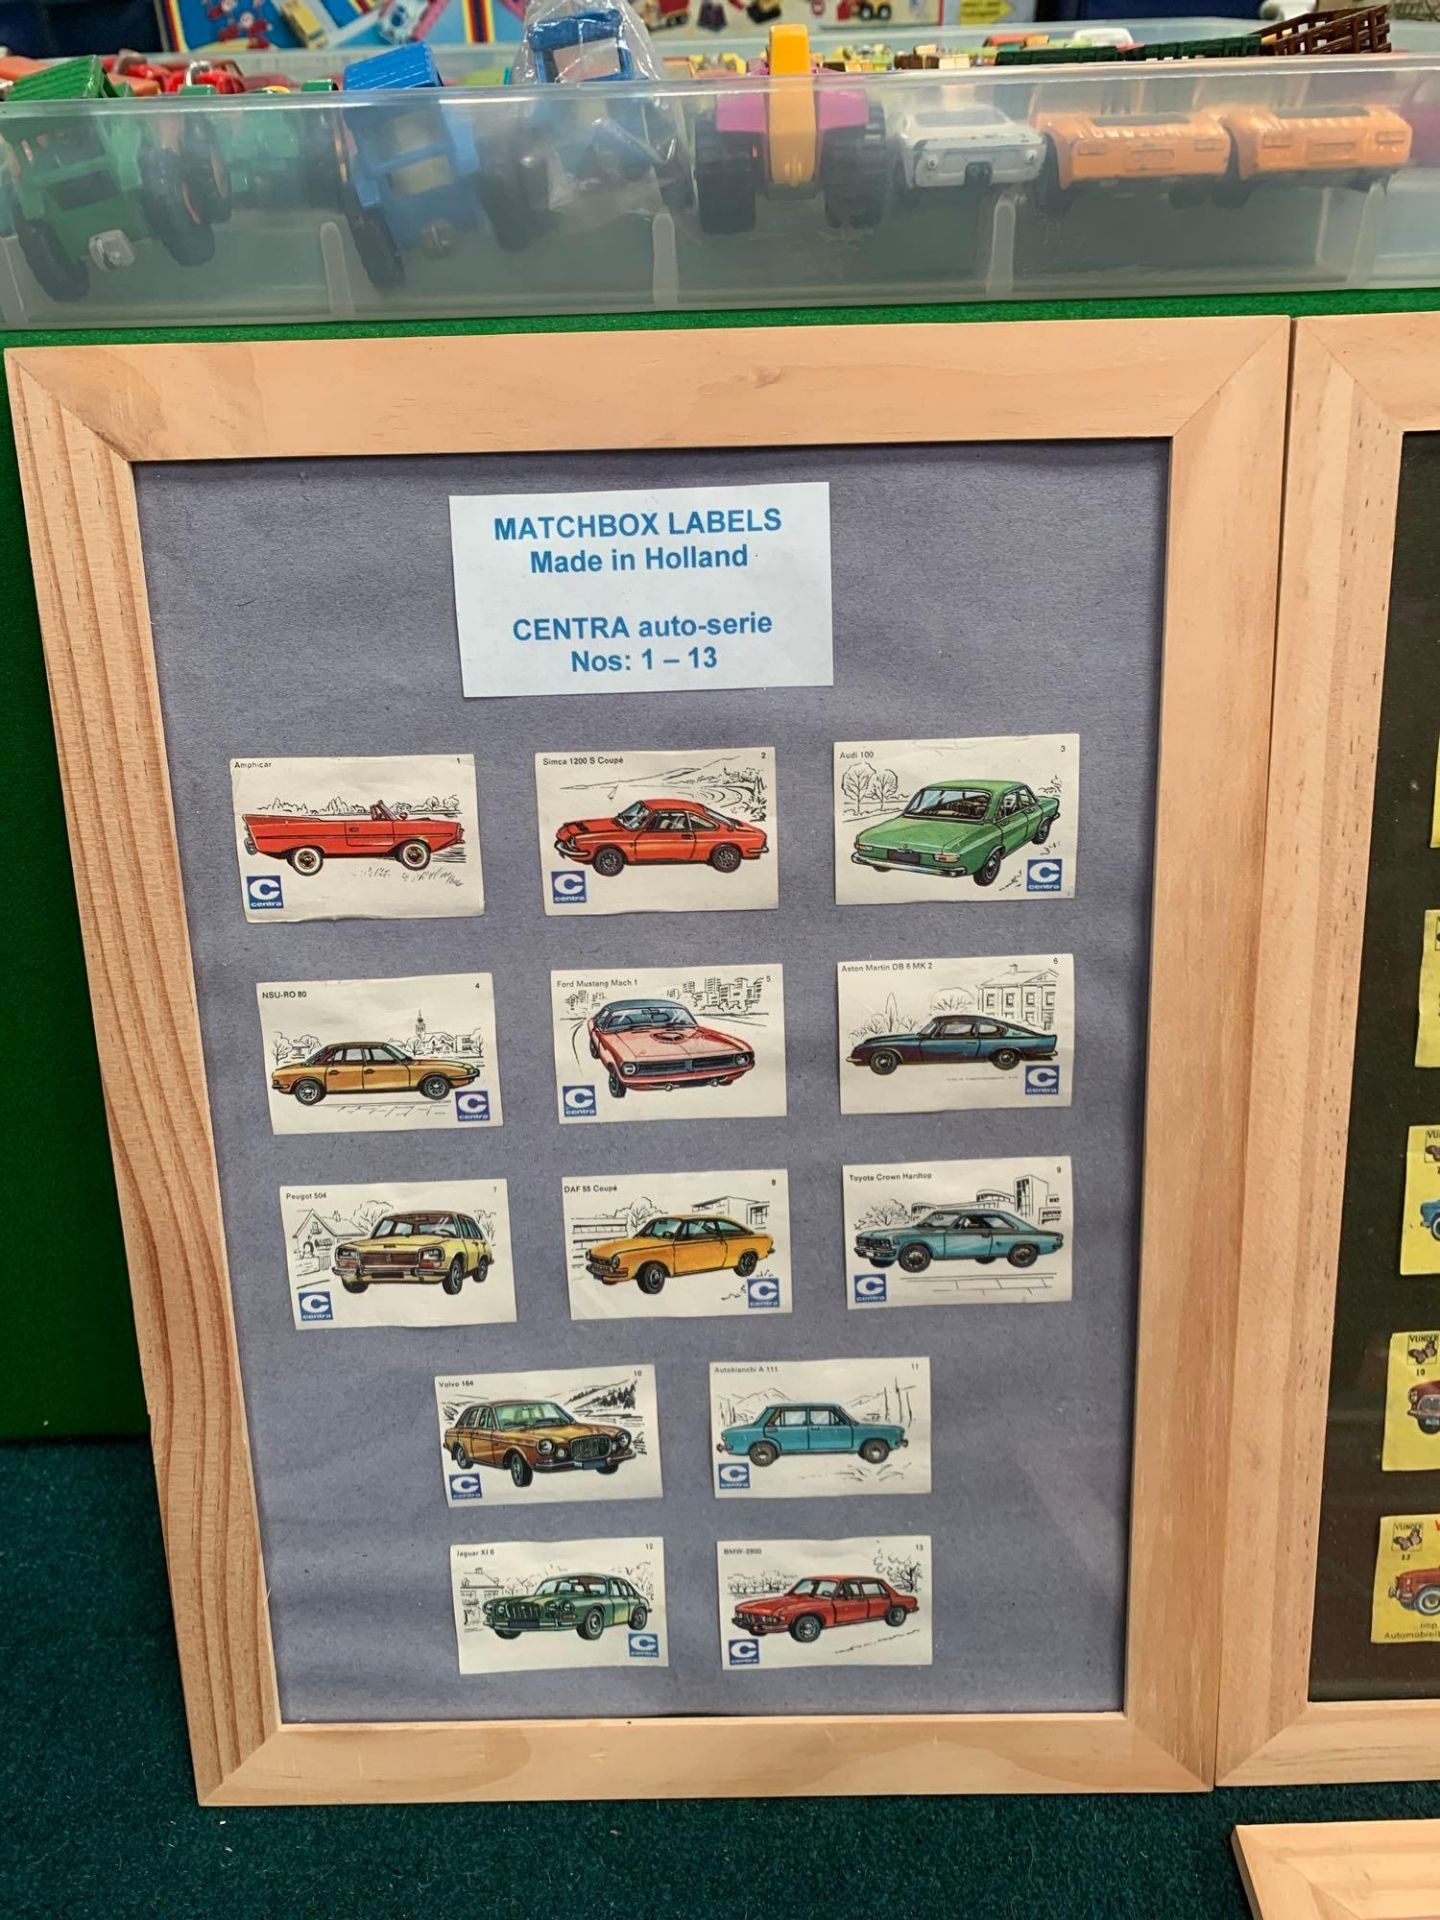 6 X Framed Matchbox Labels Made In Holland. - Centra Auto Series 1-13 Centra Auto Series 14 - 25 - Image 4 of 11